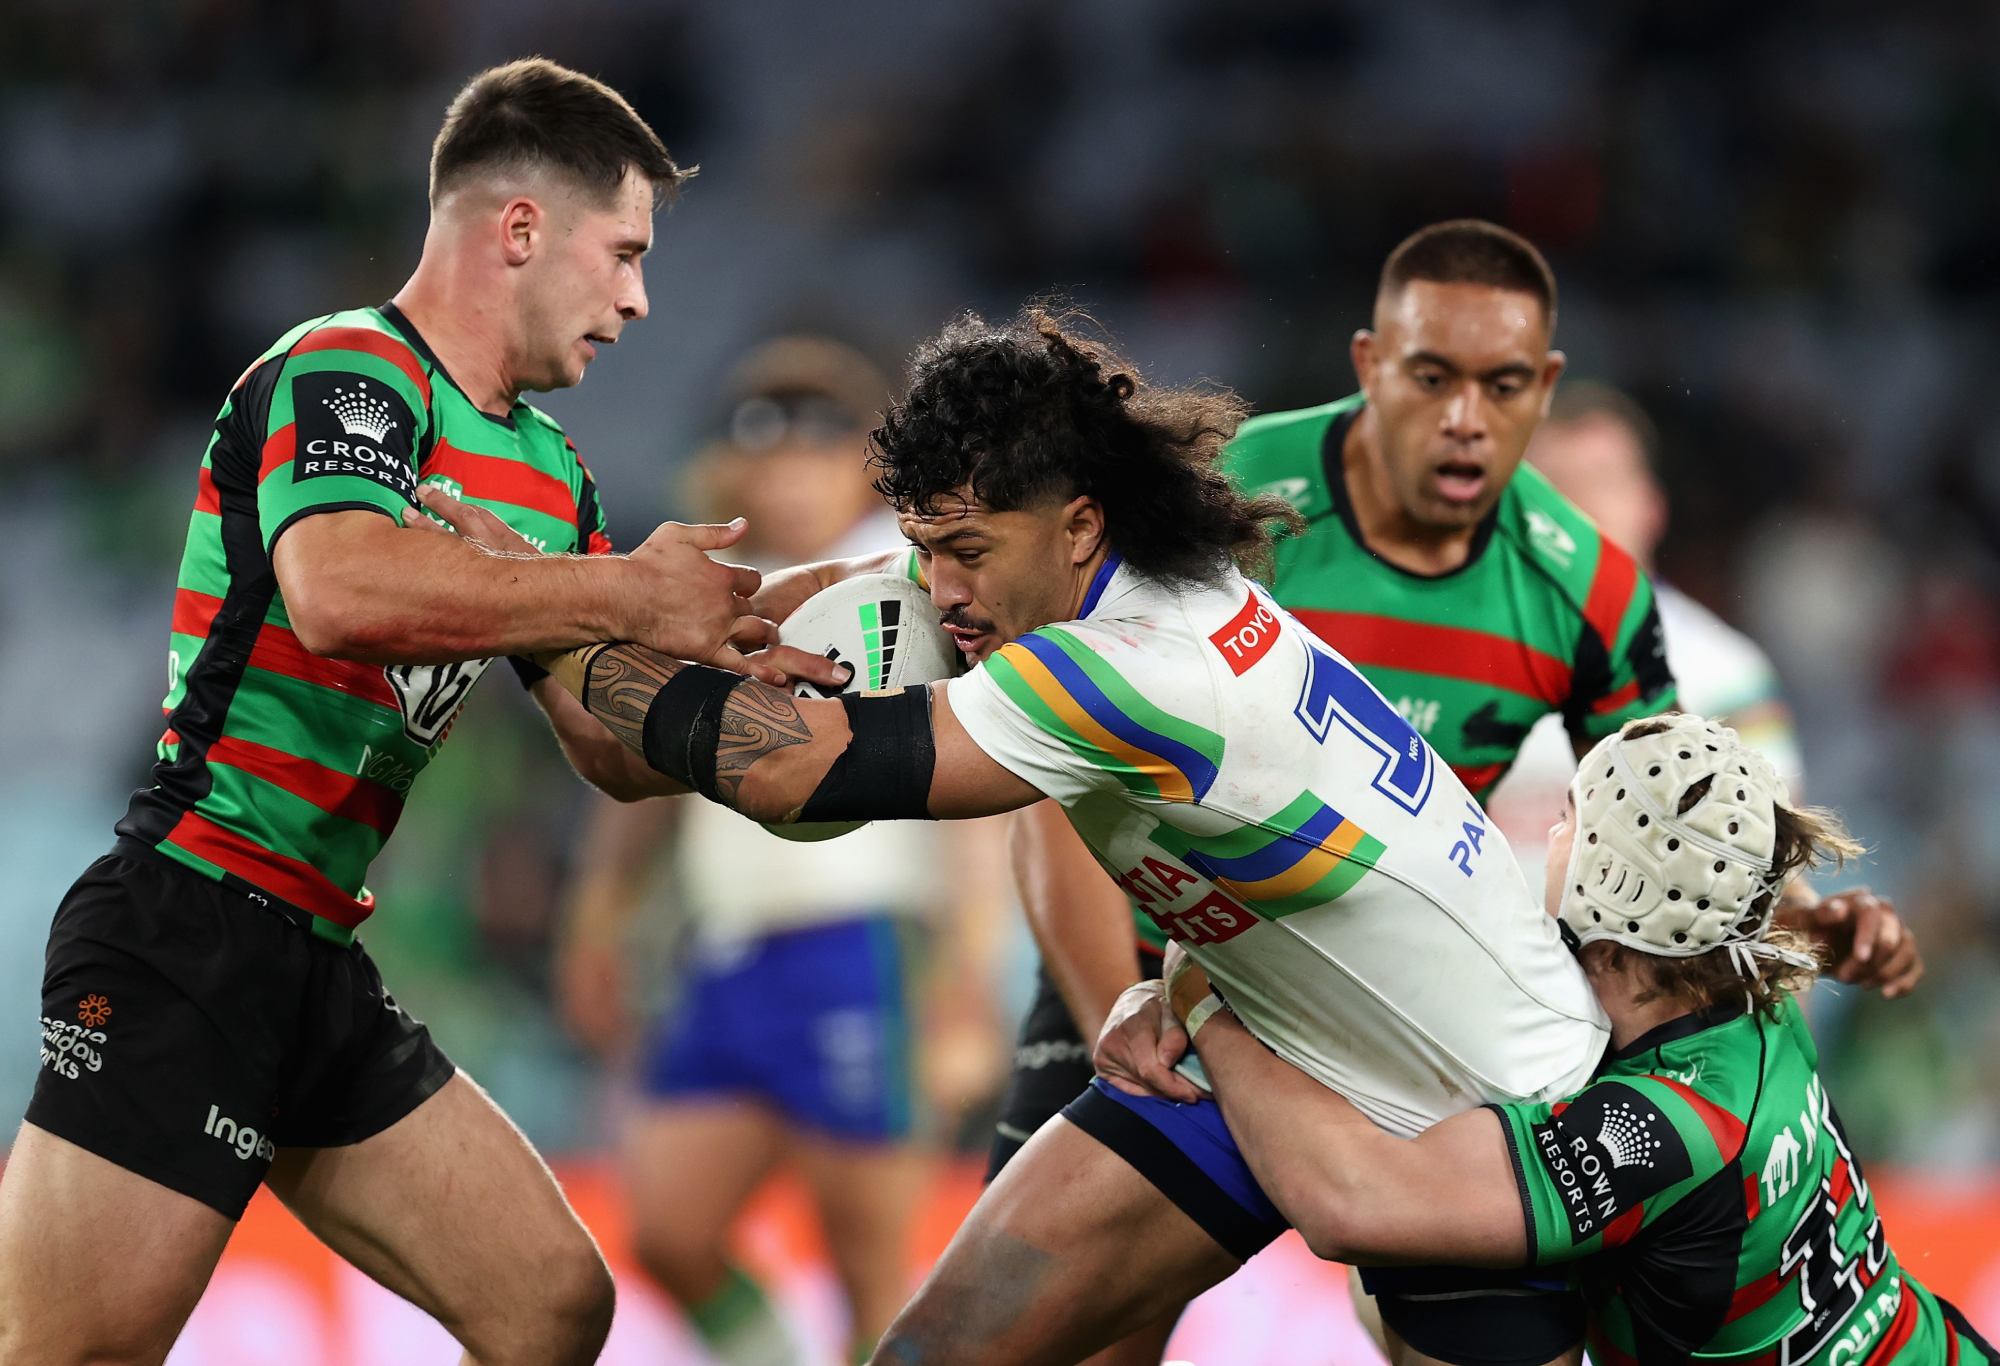 SYDNEY, AUSTRALIA - MAY 27: Corey Harawira-Naera of the Raiders is tackled during the round 13 NRL match between South Sydney Rabbitohs and Canberra Raiders at Accor Stadium on May 27, 2023 in Sydney, Australia. (Photo by Brendon Thorne/Getty Images)